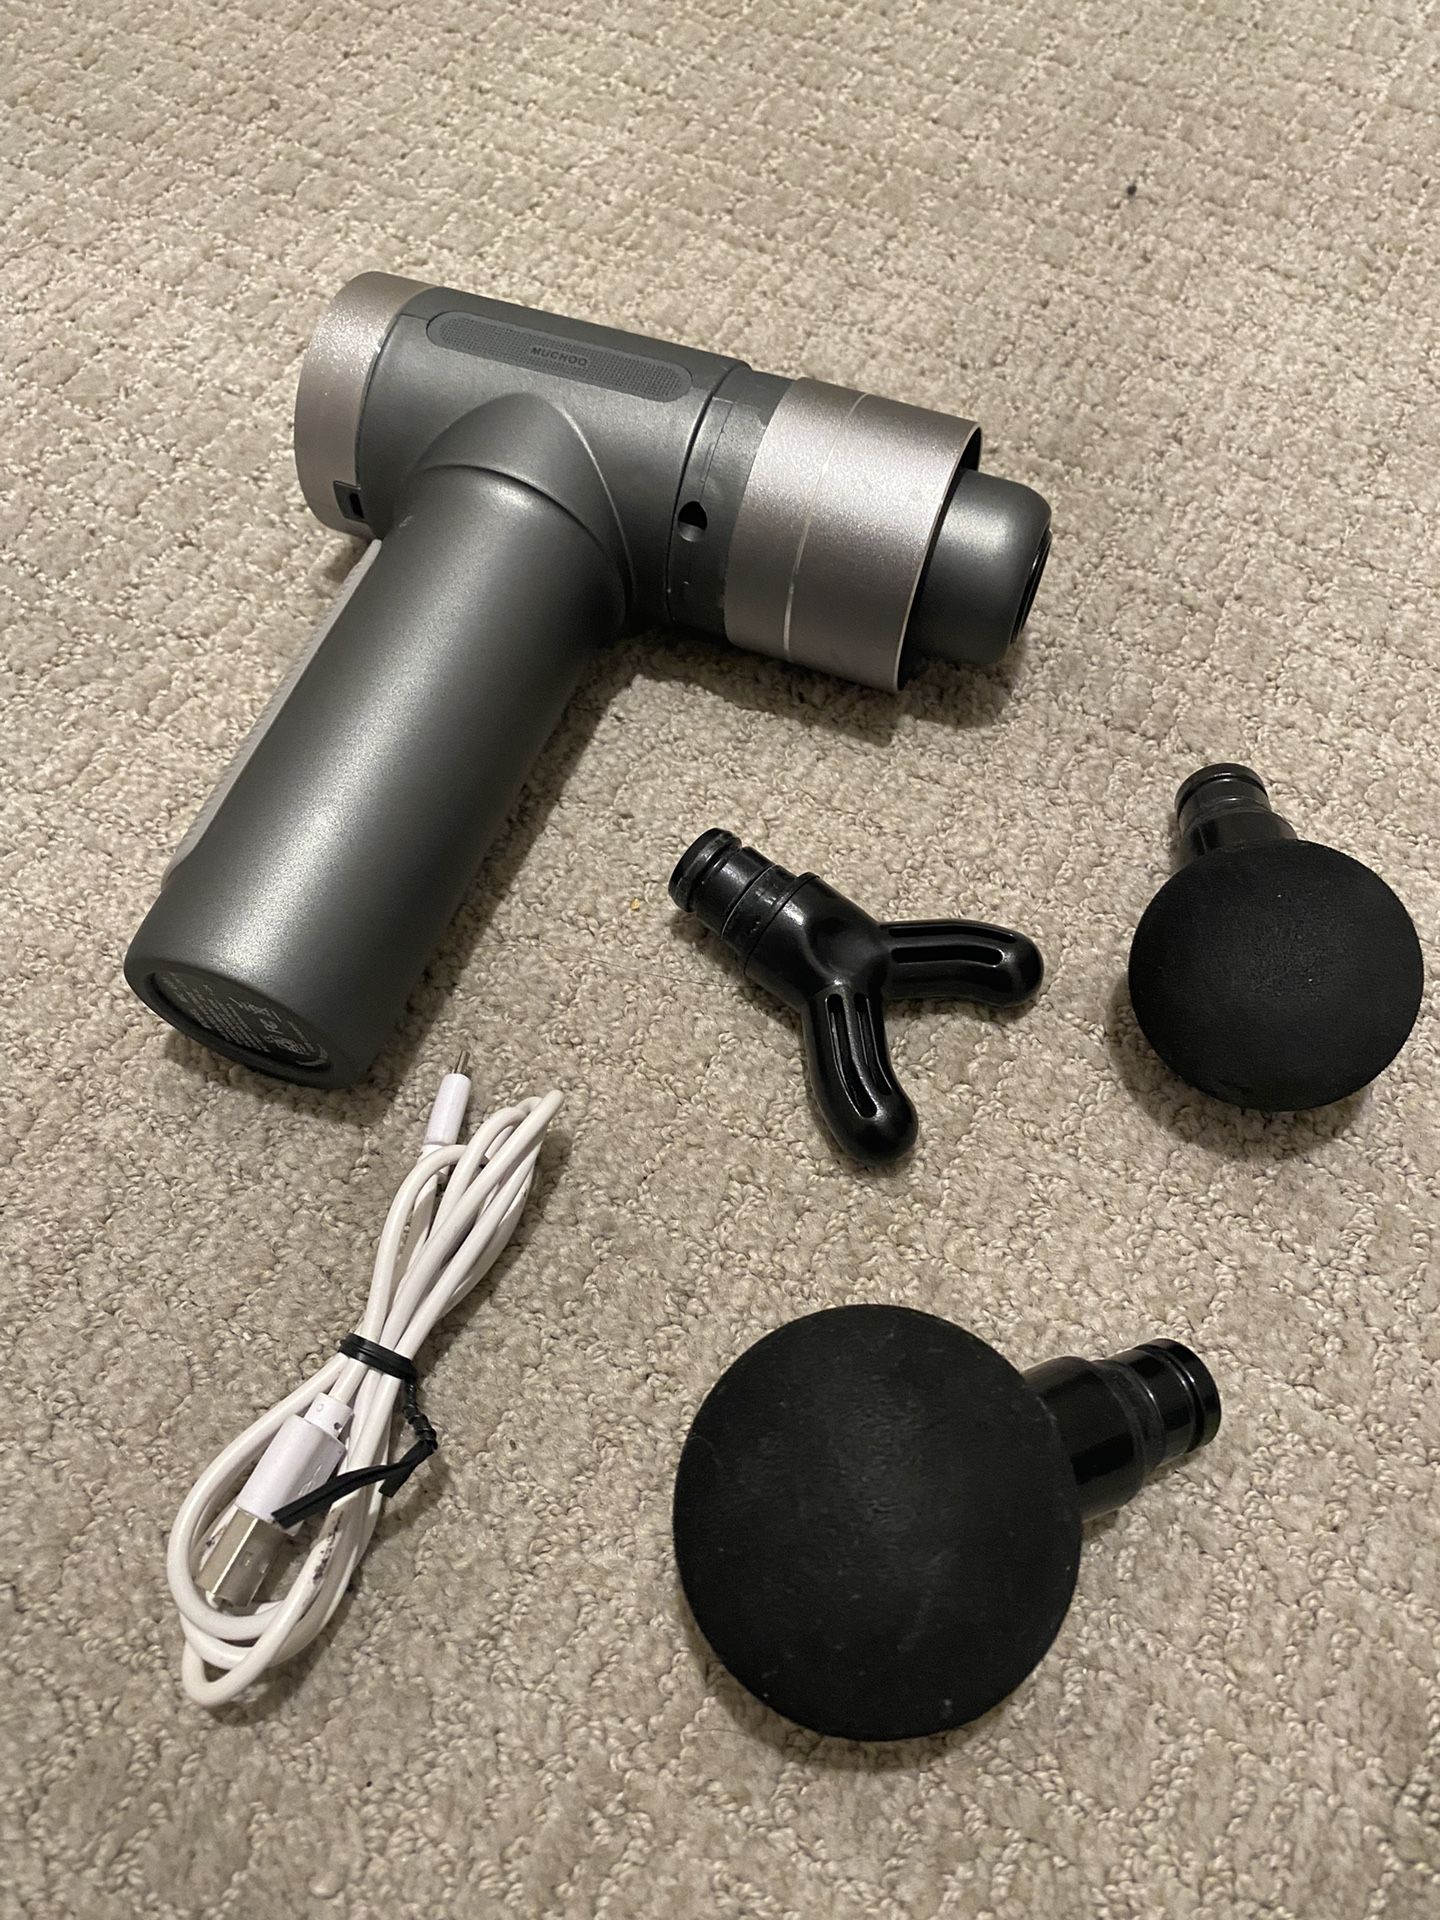 Massage Gun w/ Attachments And Charger $50 Or OBO